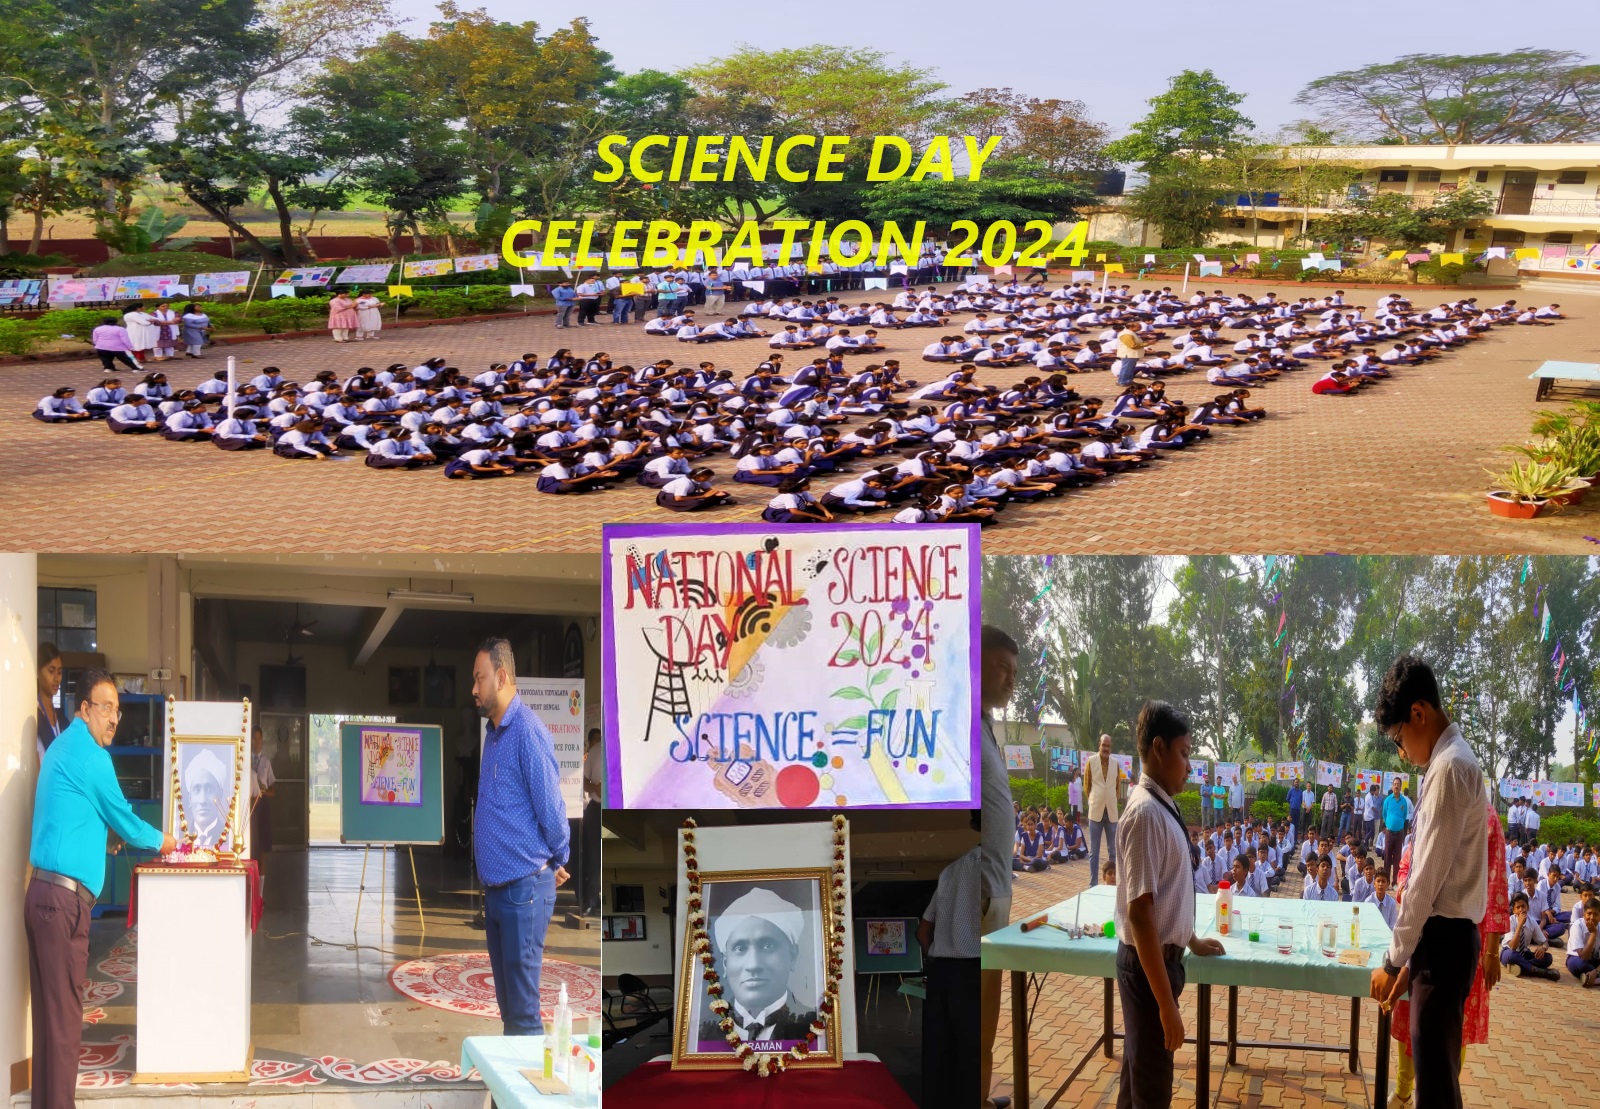 SCIENCE DAY 2024